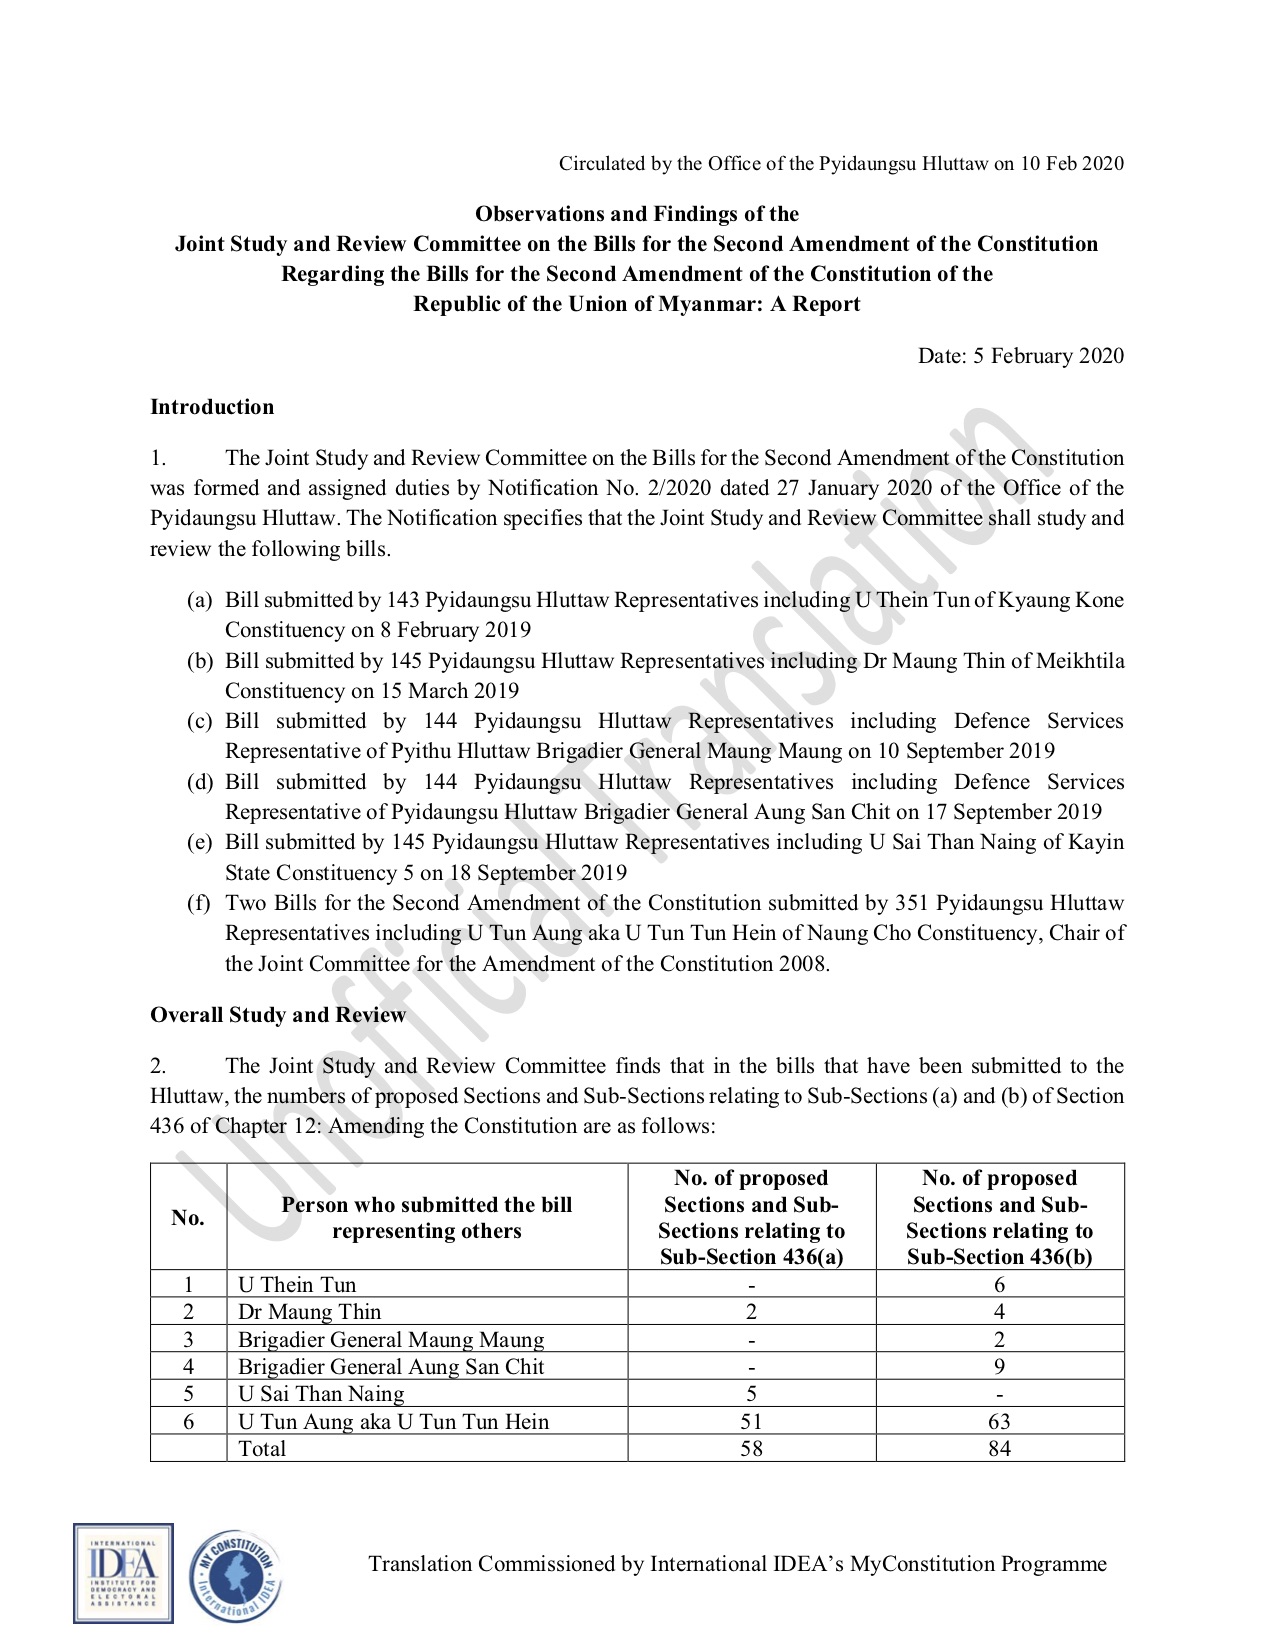 Myanmar: Observations and Findings of the Joint Study and Review Committee on the Bills for the Second Amendment of the Constitution